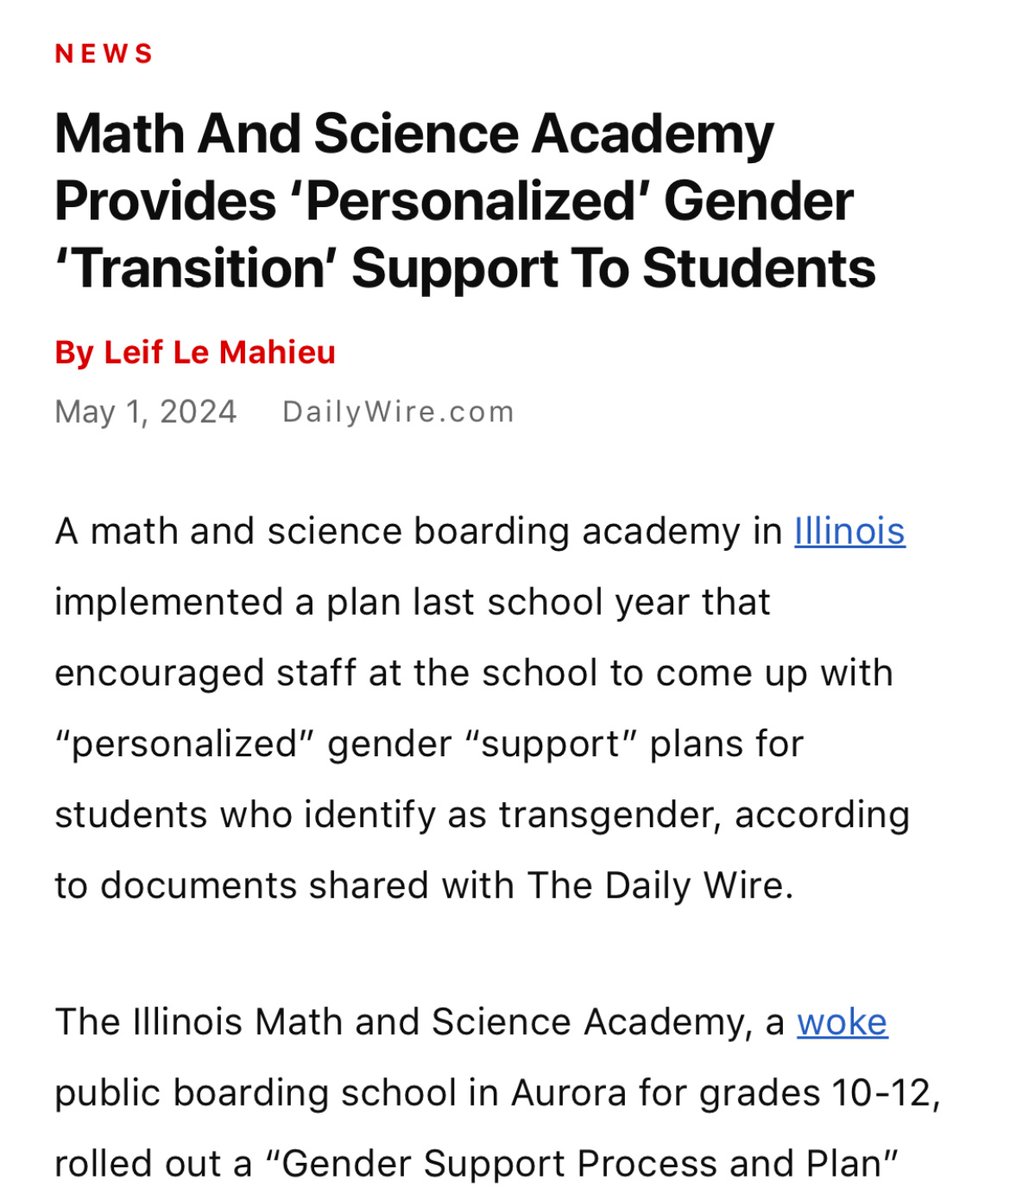 IL’s top STEM school, where students live on campus, has a gender support plan that allows the school to keep a child’s transition a secret from parents.